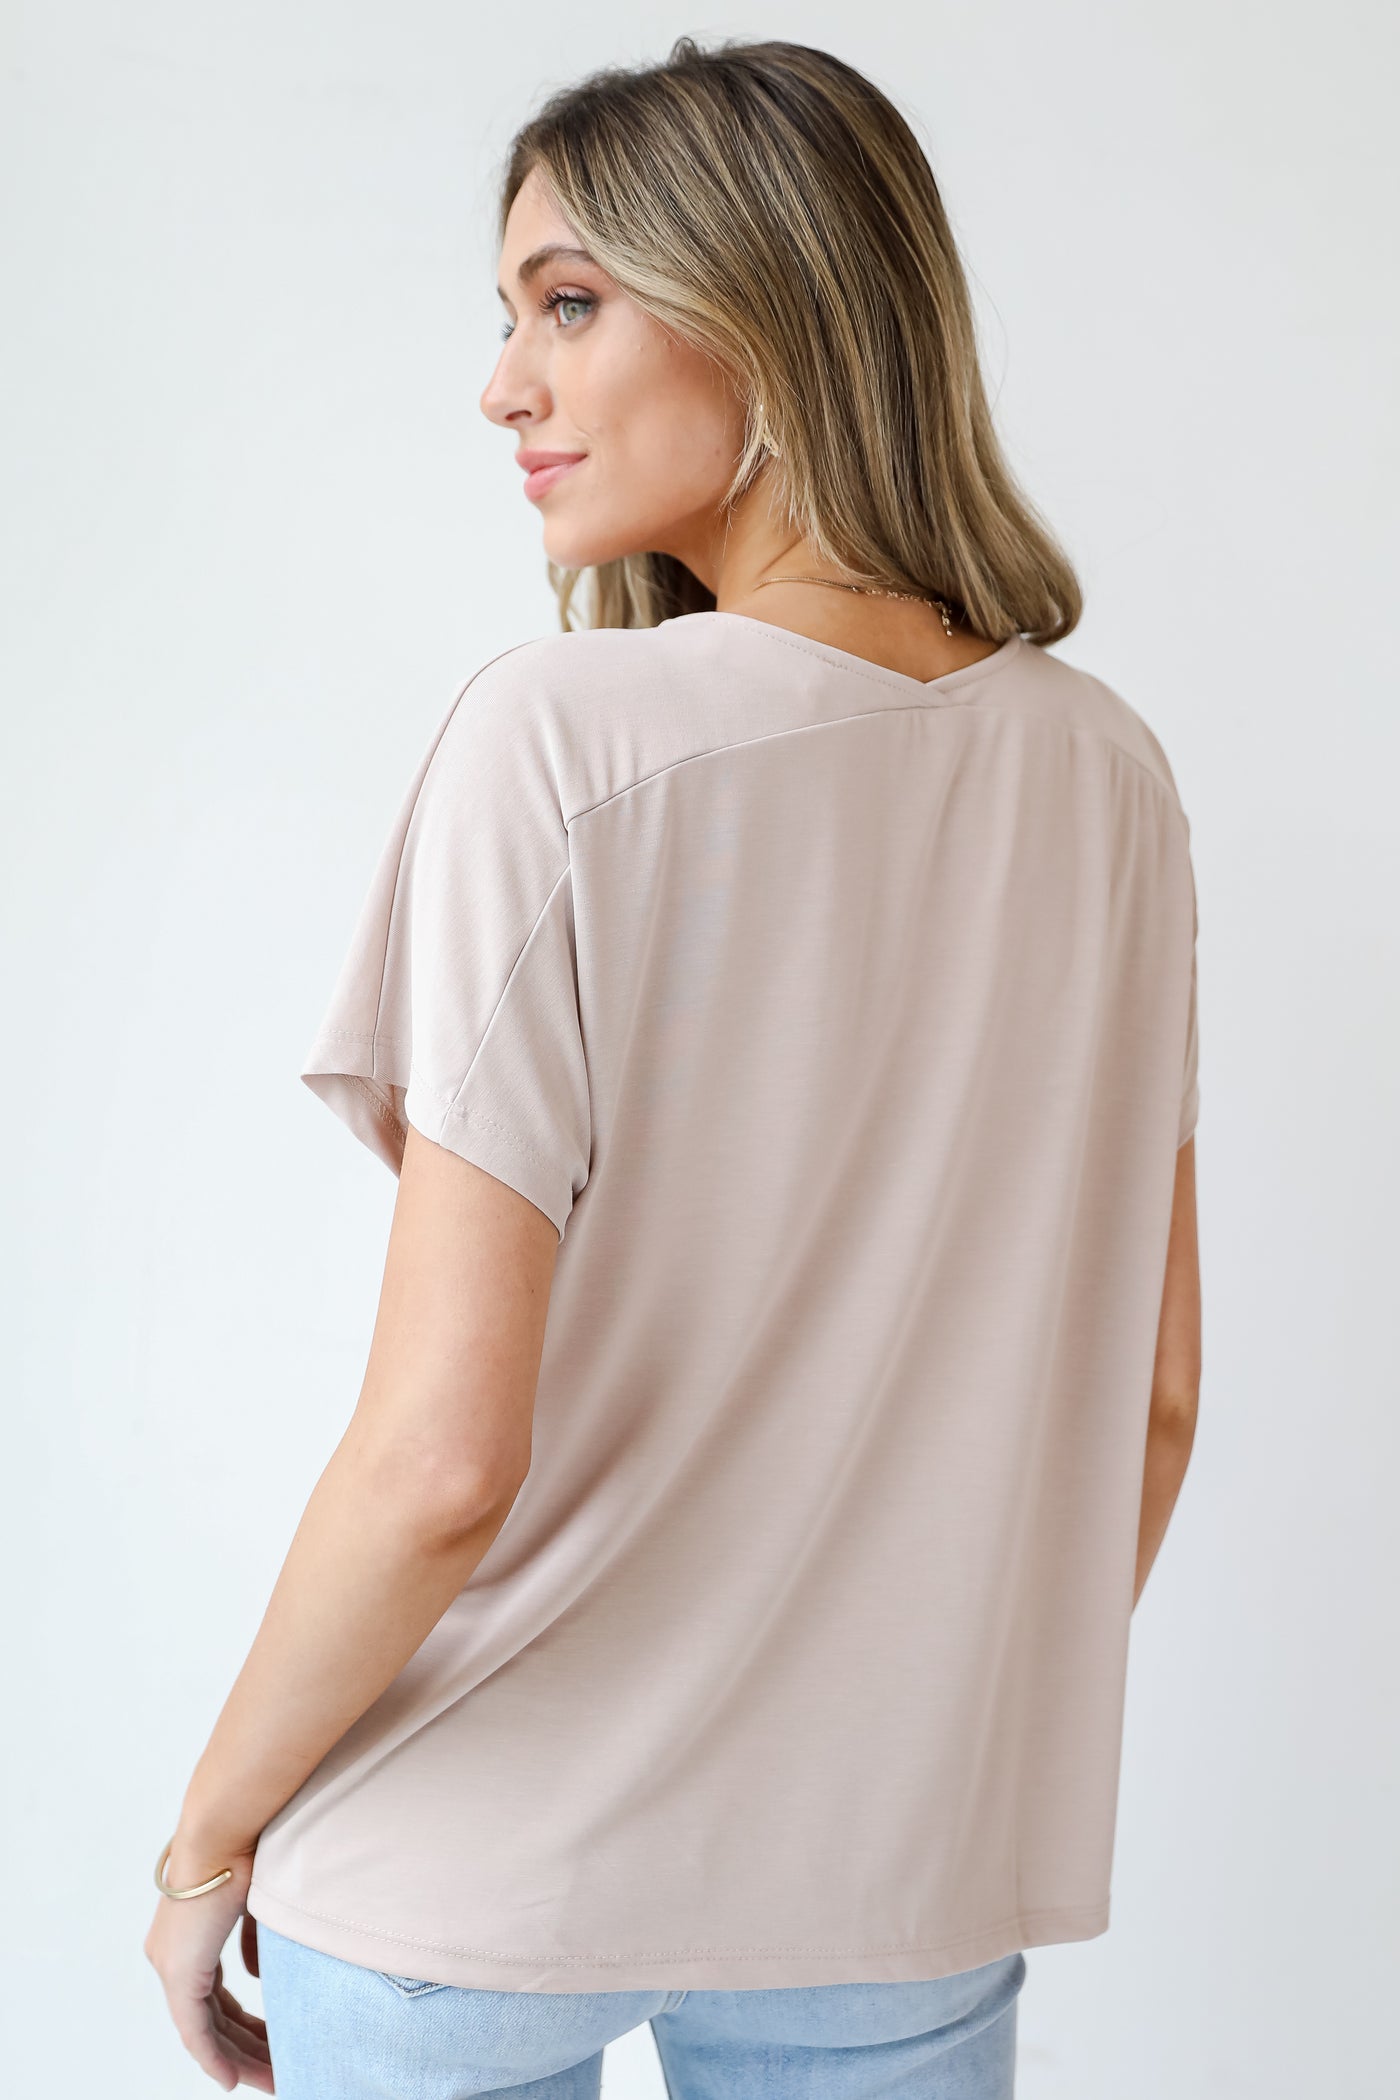 tan Everyday Tee back view